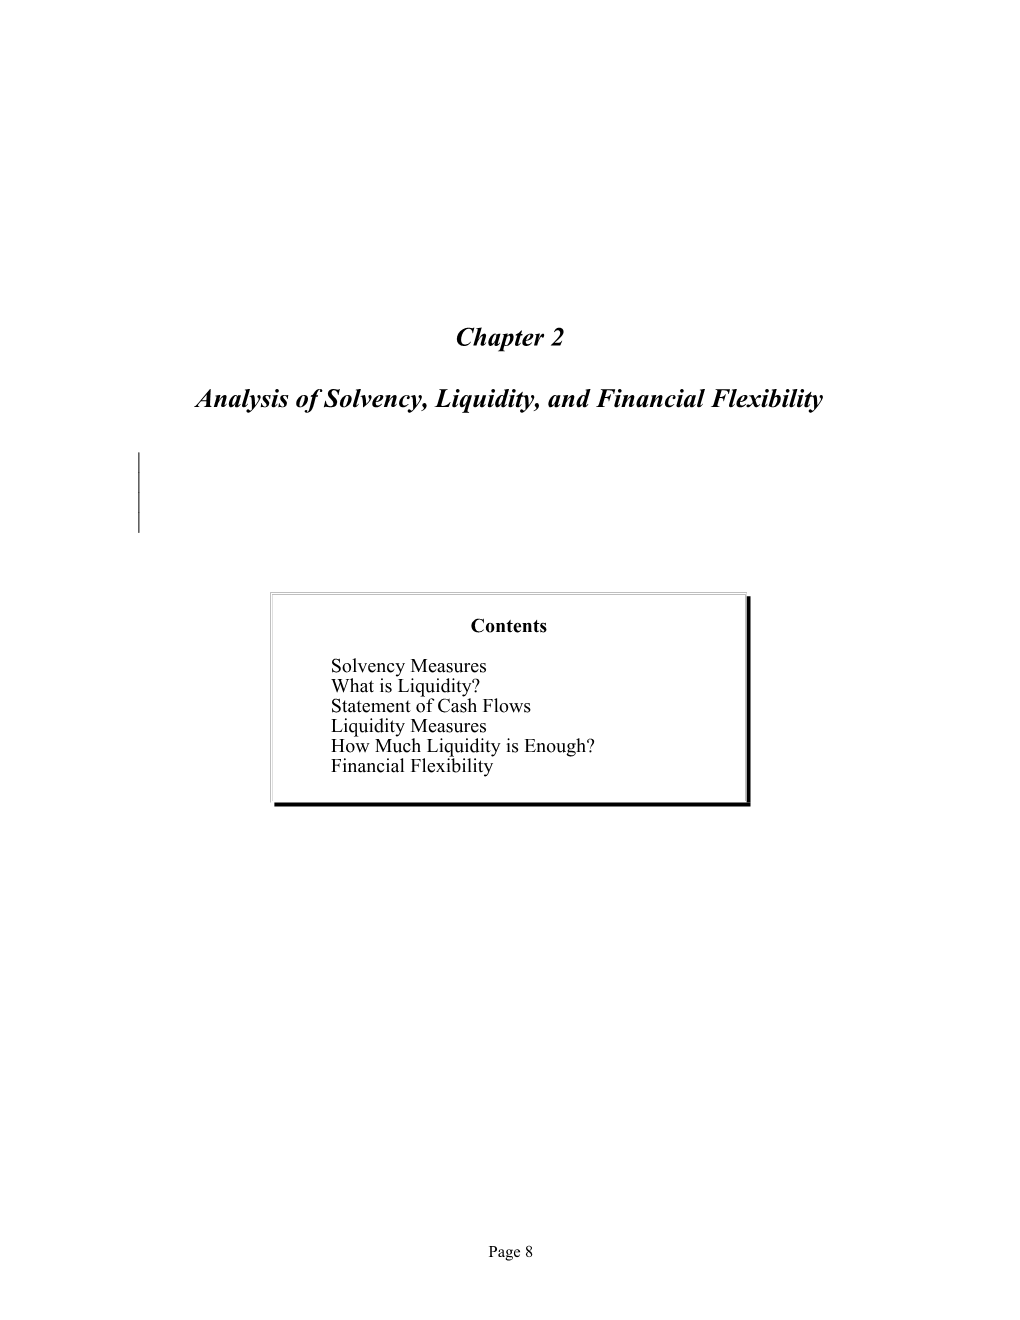 Analysis of Solvency, Liquidity, and Financial Flexibility